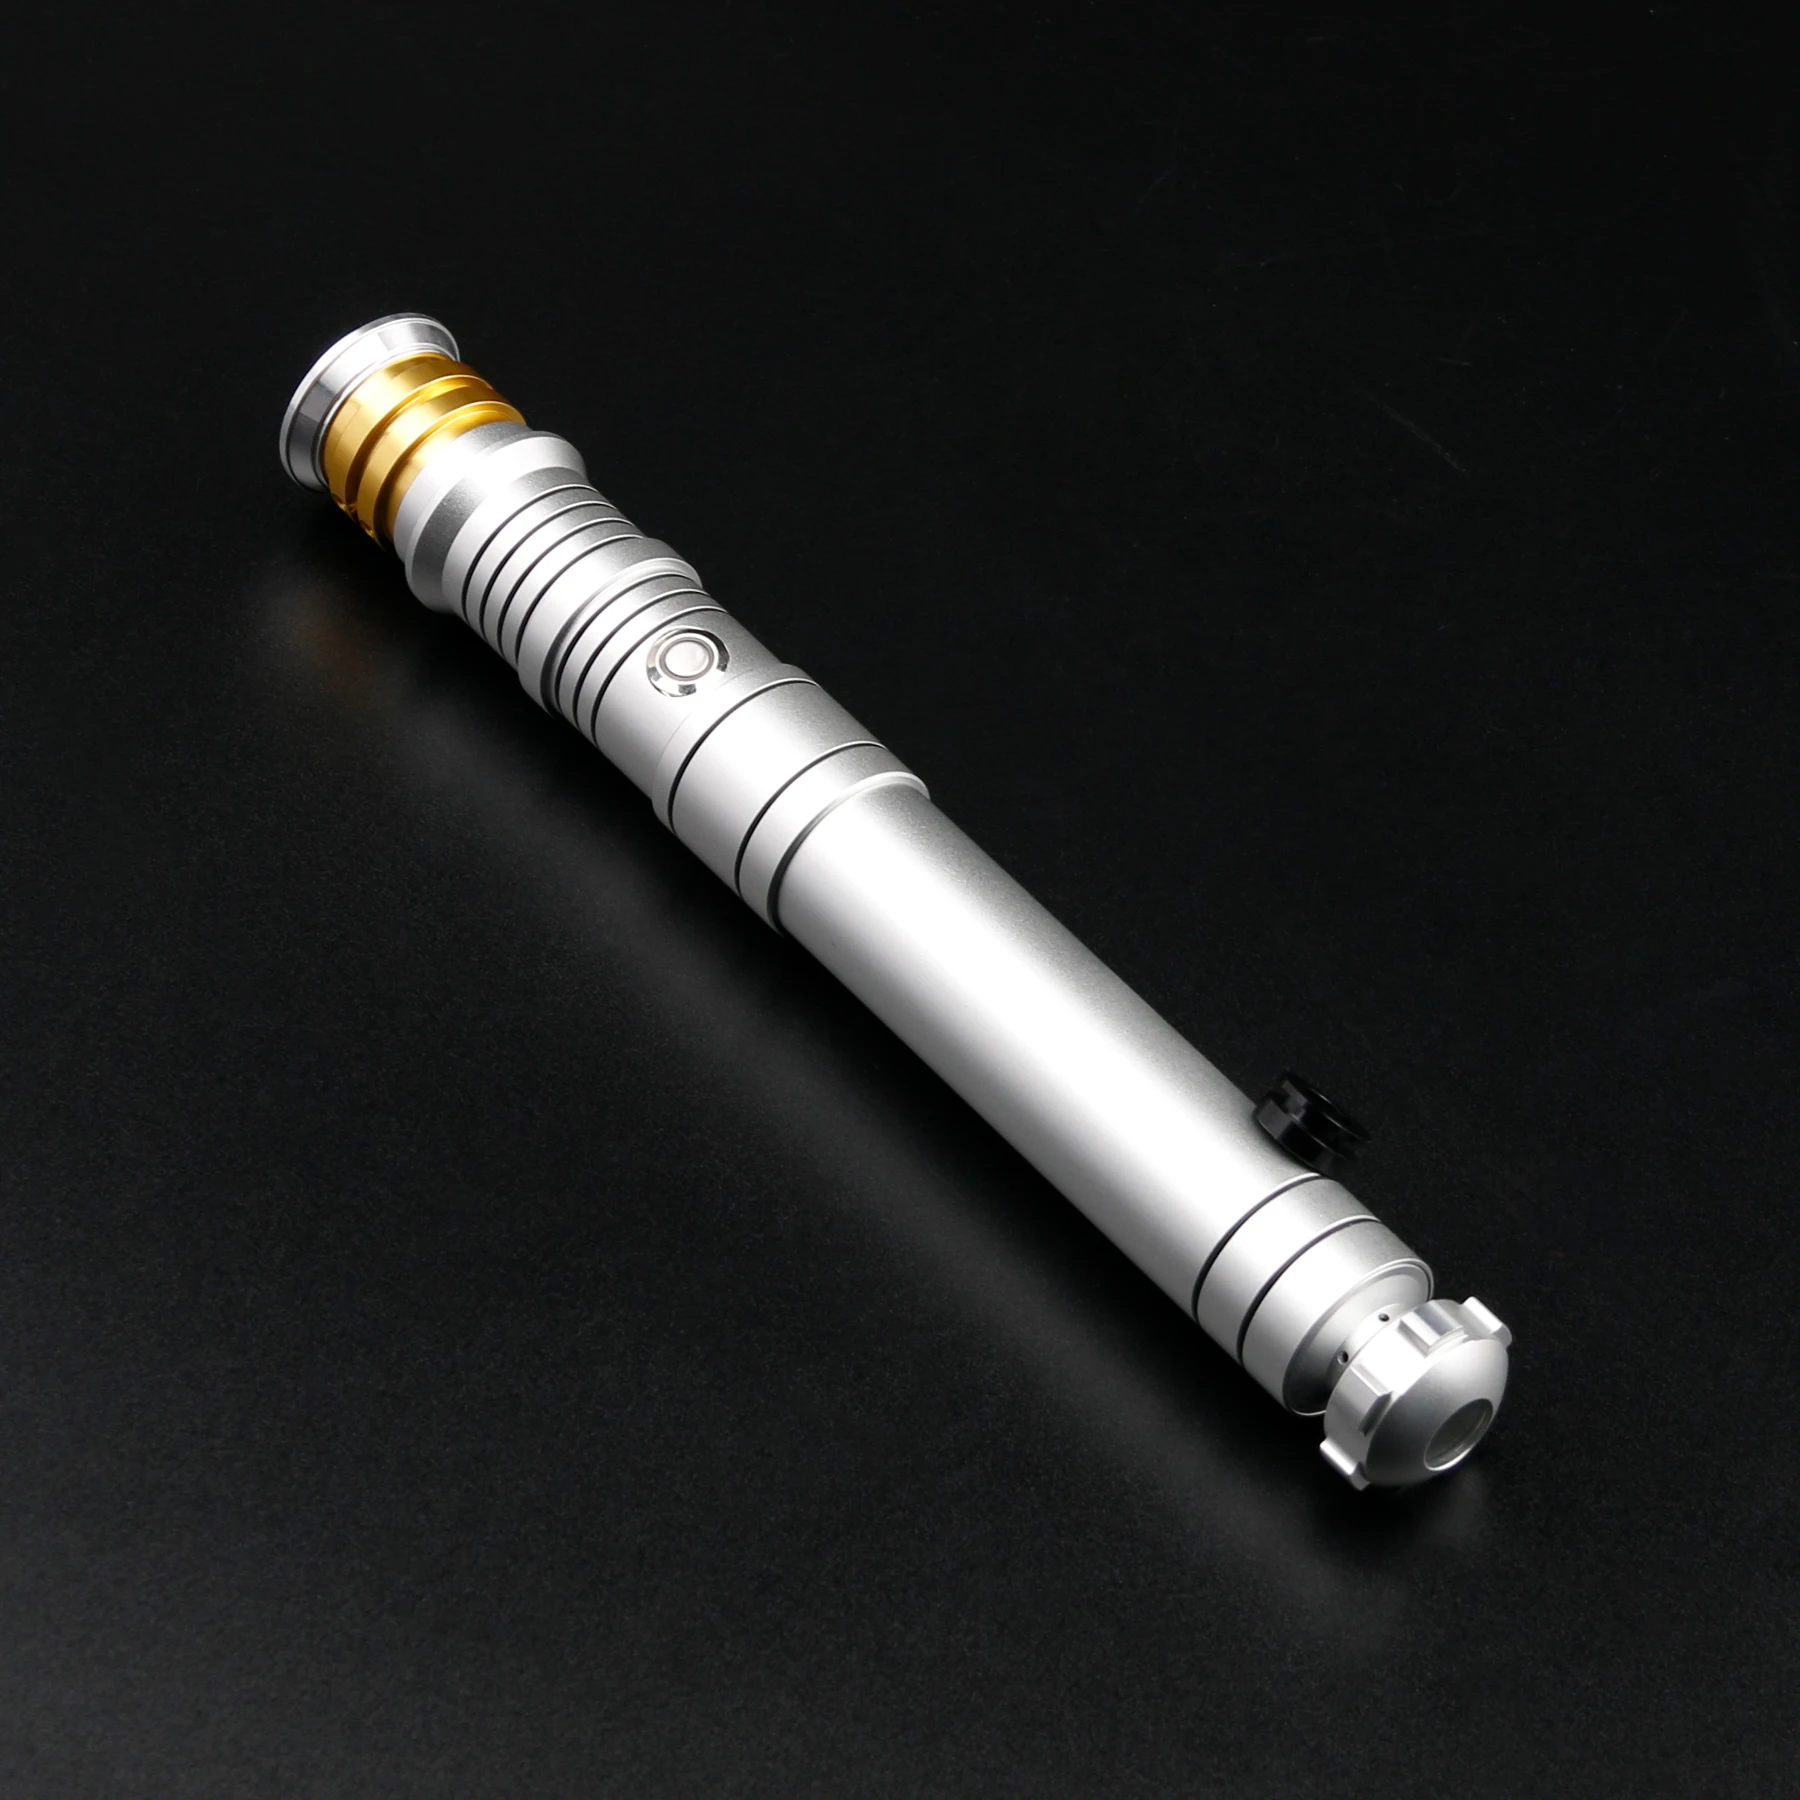 N smooth swing heavy dueling lightsaber metal hilt 1 inch blade gesture control cosplay thumb200